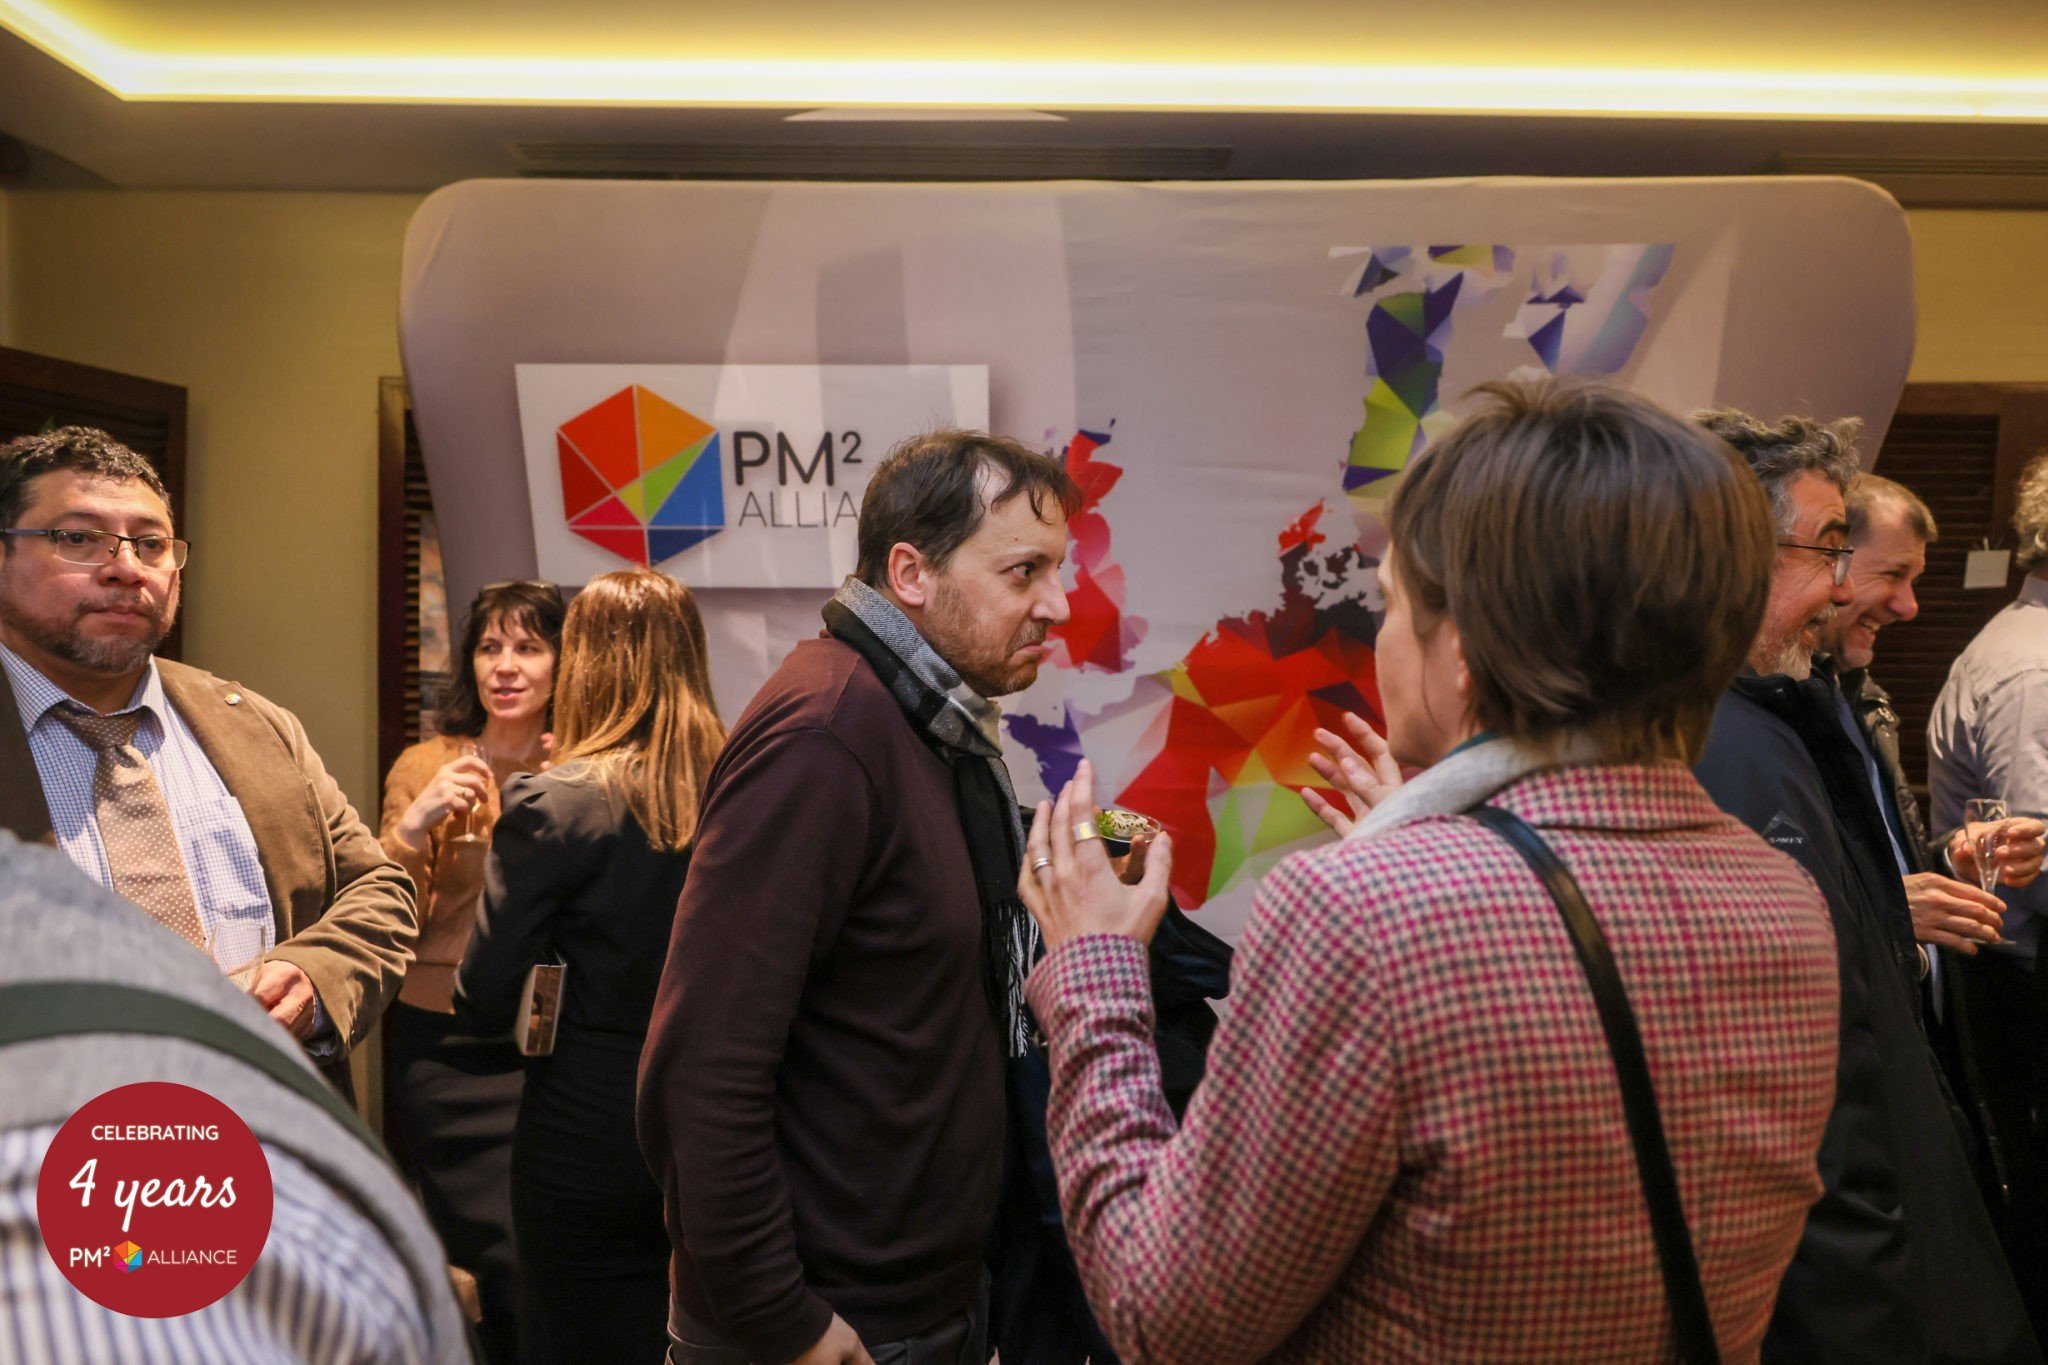 PM² Alliance, networking, social gathering, Brussels, community, insights, views, anecdotes, PM² Methodology, authors, contributors, networking, interaction, attendees, celebration, collective accomplishments, exclusive venue, PM² Alliance event.